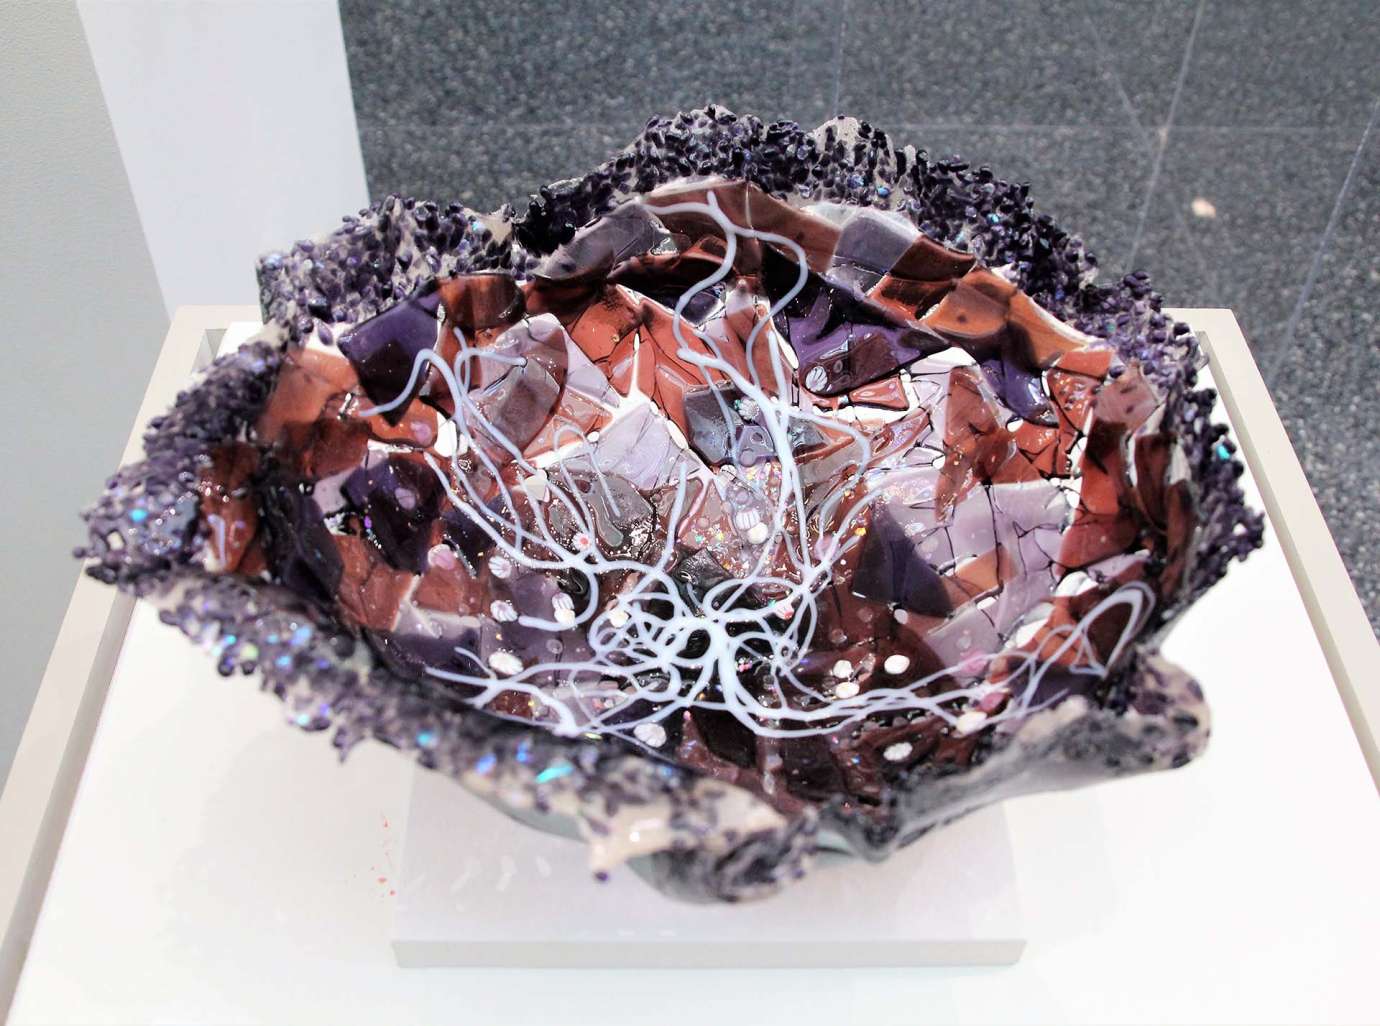 A bowl made from layers of folded glass in different shades of purple